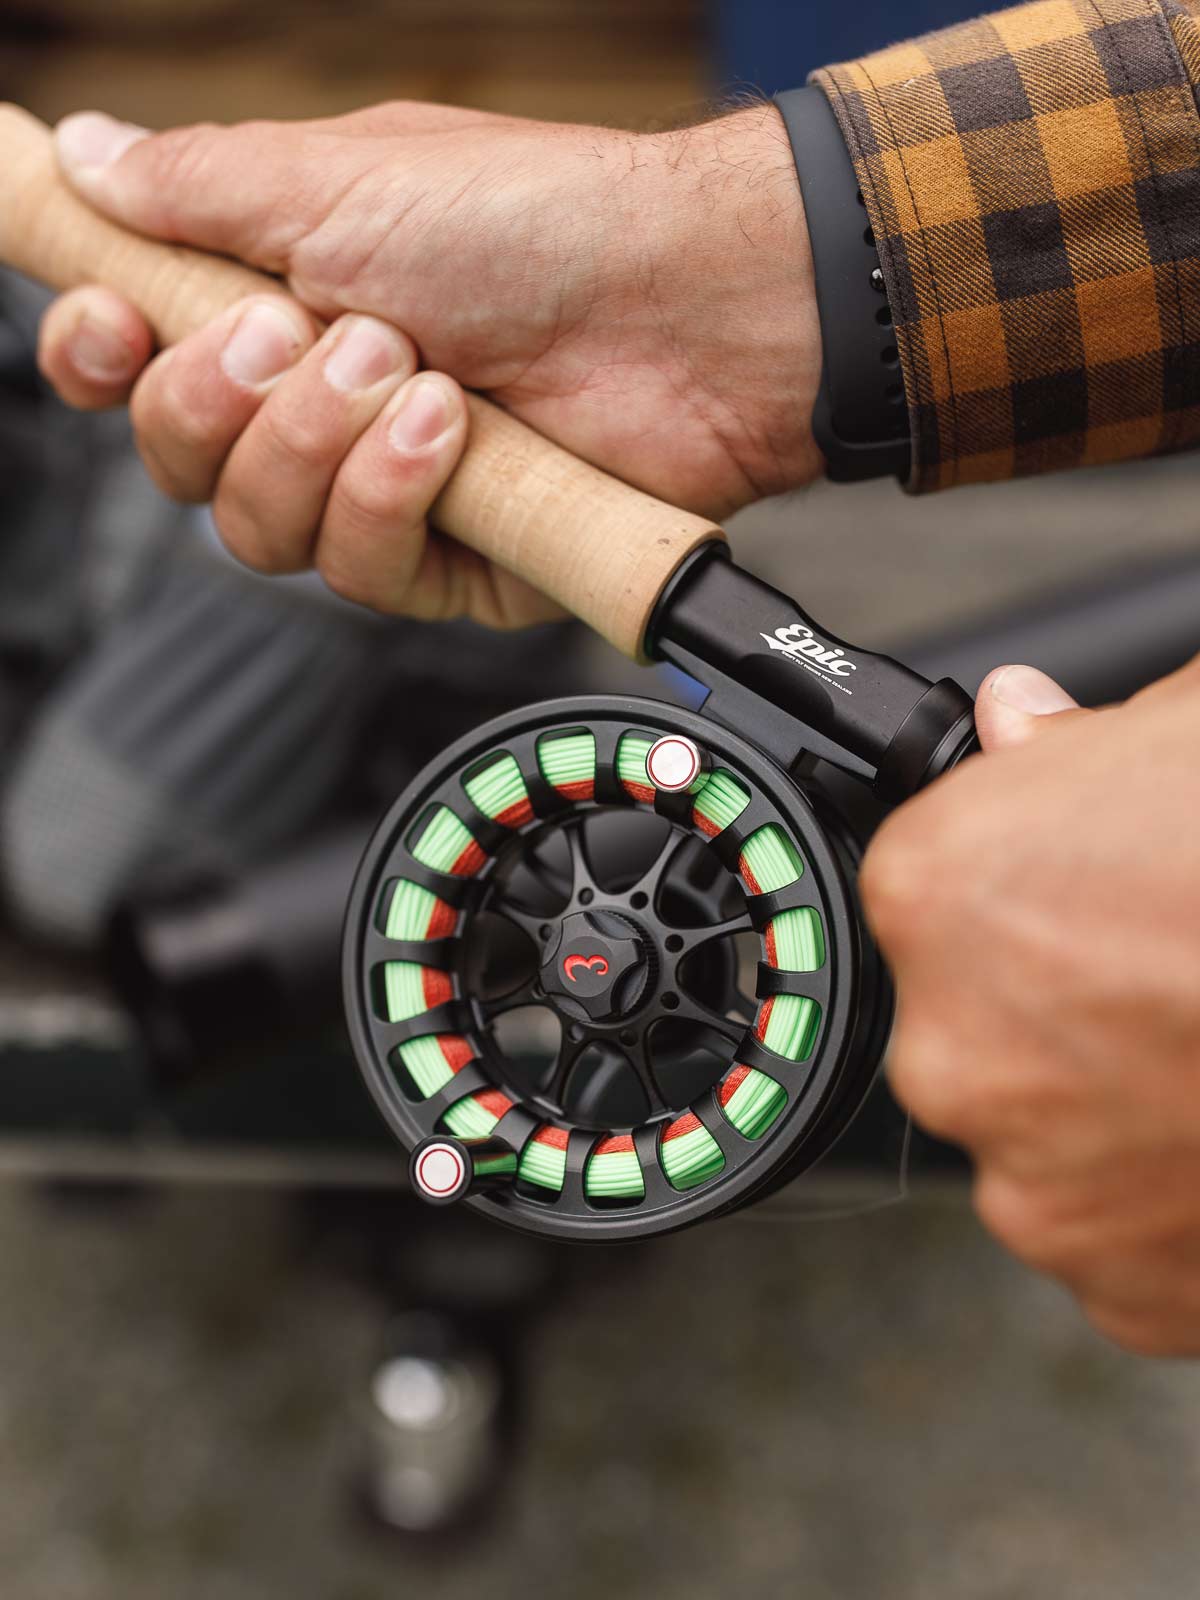 Voted Best New Fly Reel Epic Backcountry Fly Reel